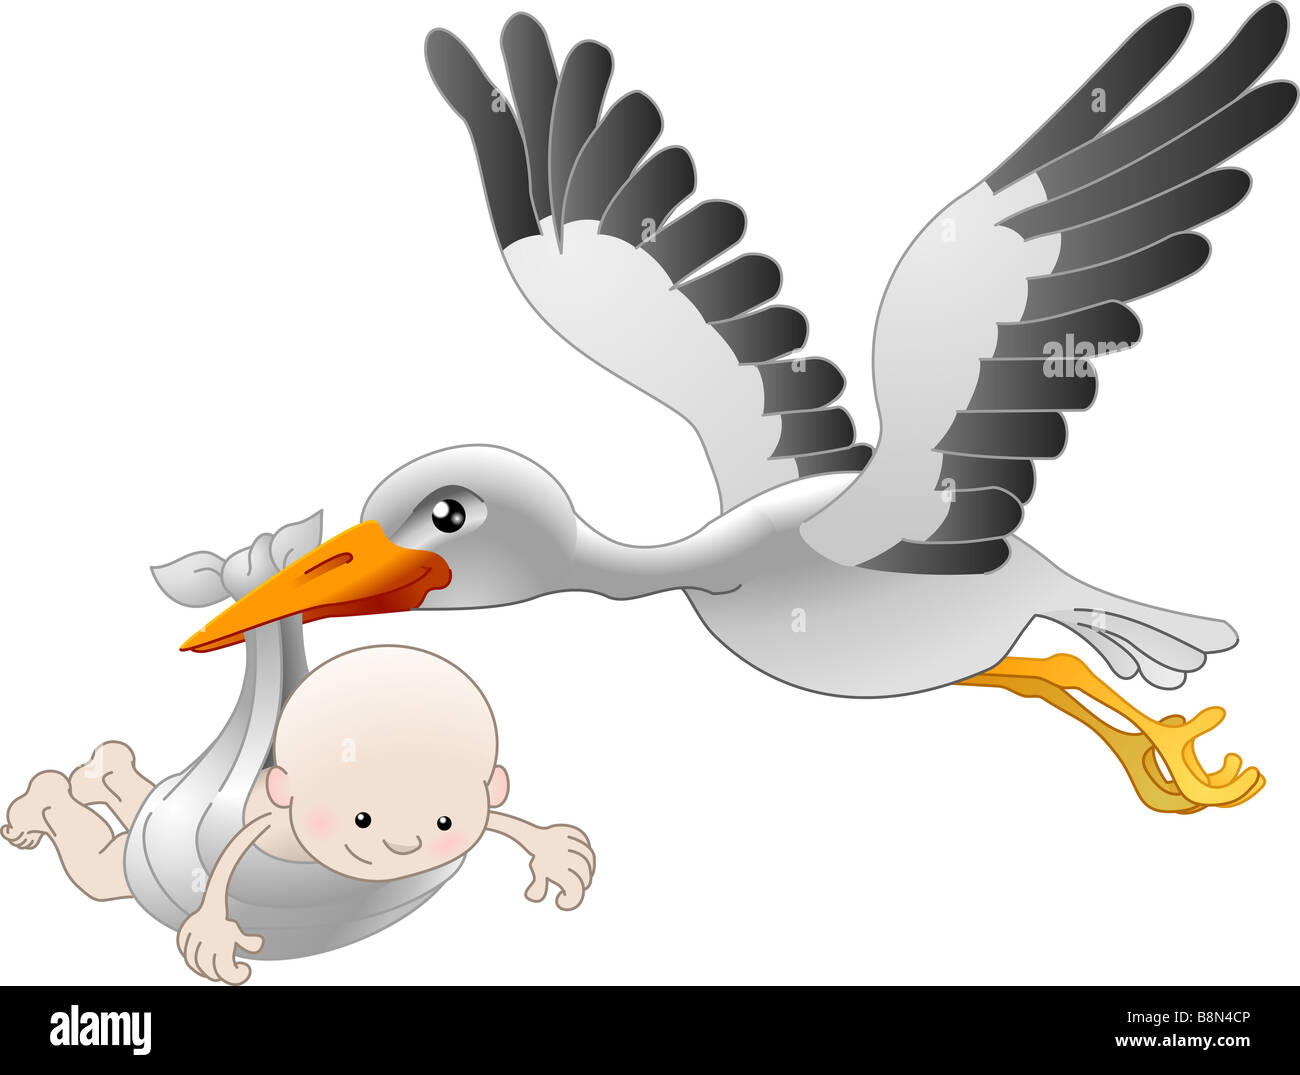 Illustration of a flying stork delivering a newborn baby Stock Photo